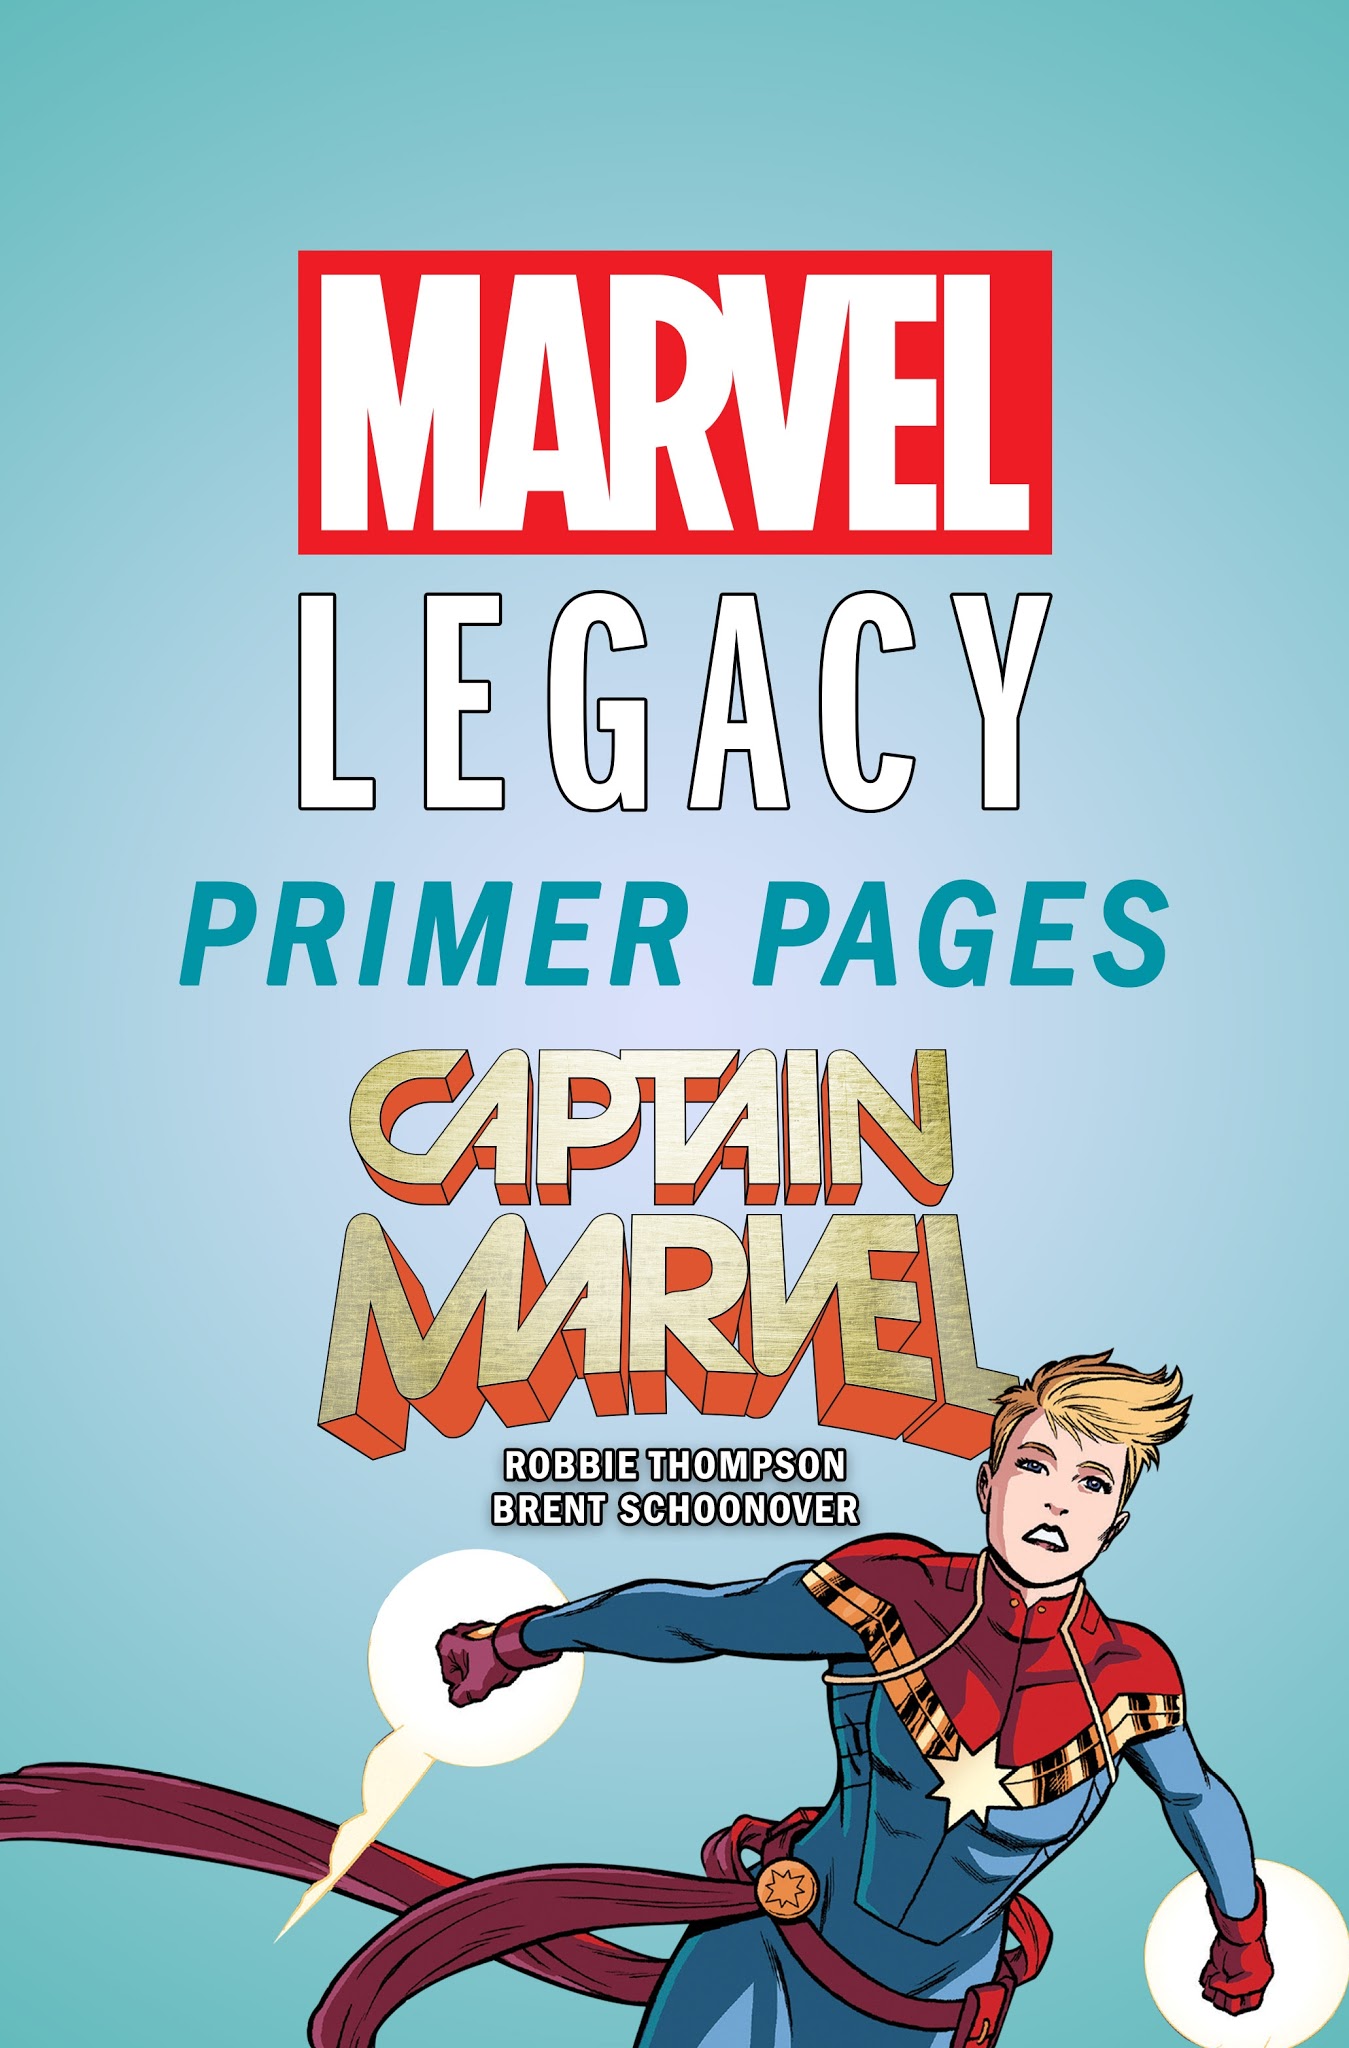 Read online Captain Marvel (2017) comic -  Issue # _Marvel Legacy Primer Pages - 1